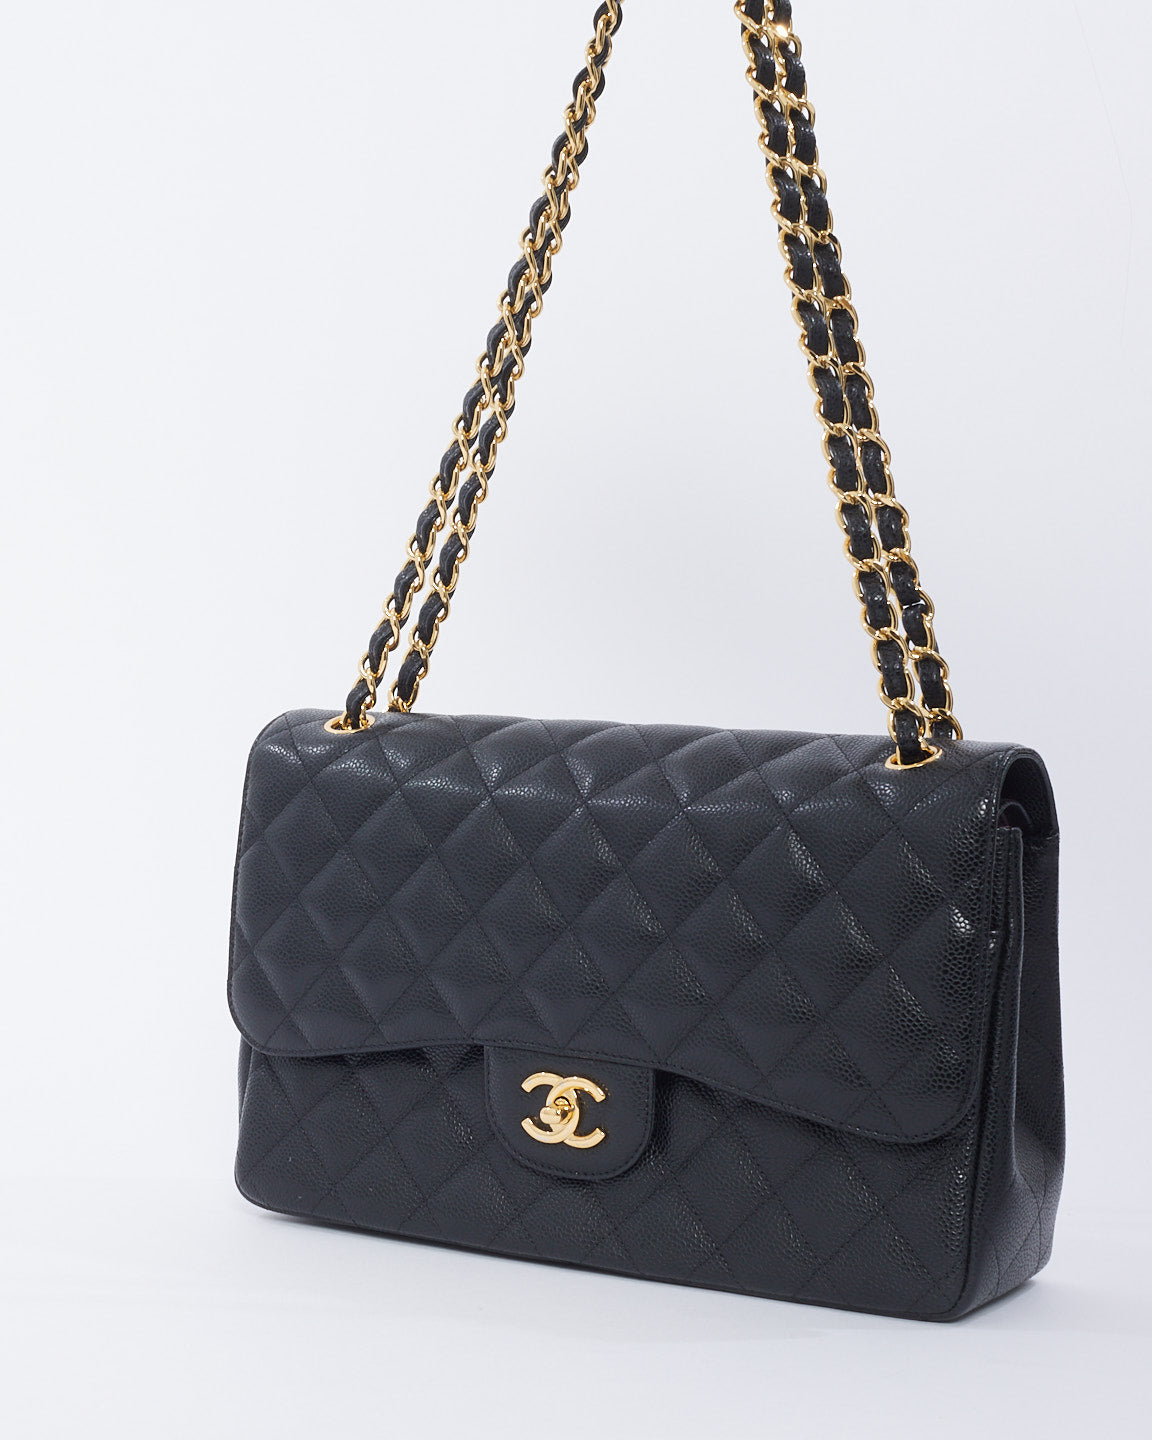 Chanel Black Caviar Leather Jumbo Classic Double Flap with GHW